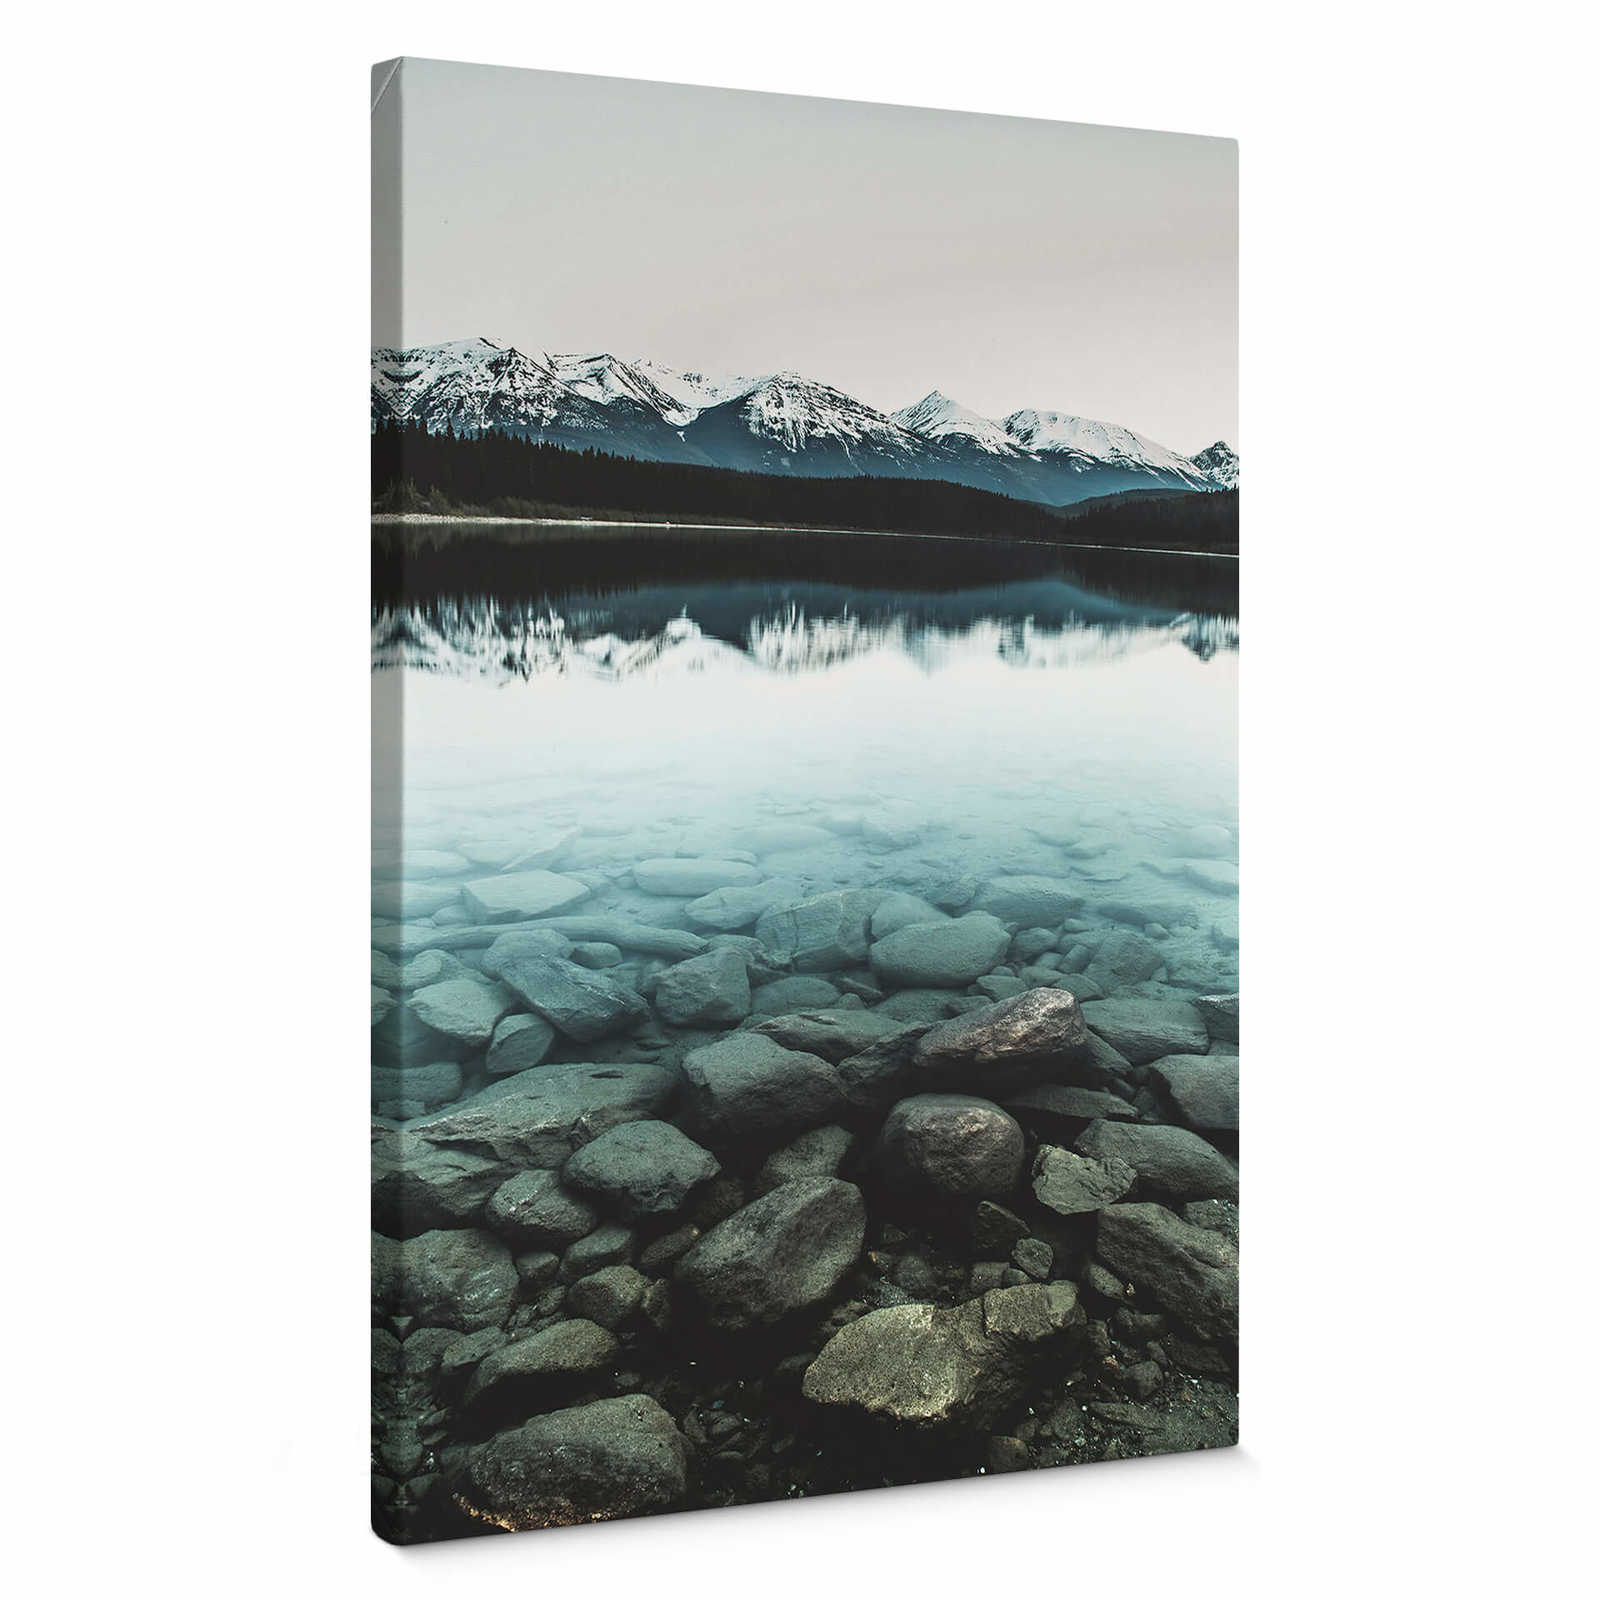         Canvas print landscape idyll lake in mountains – blue
    